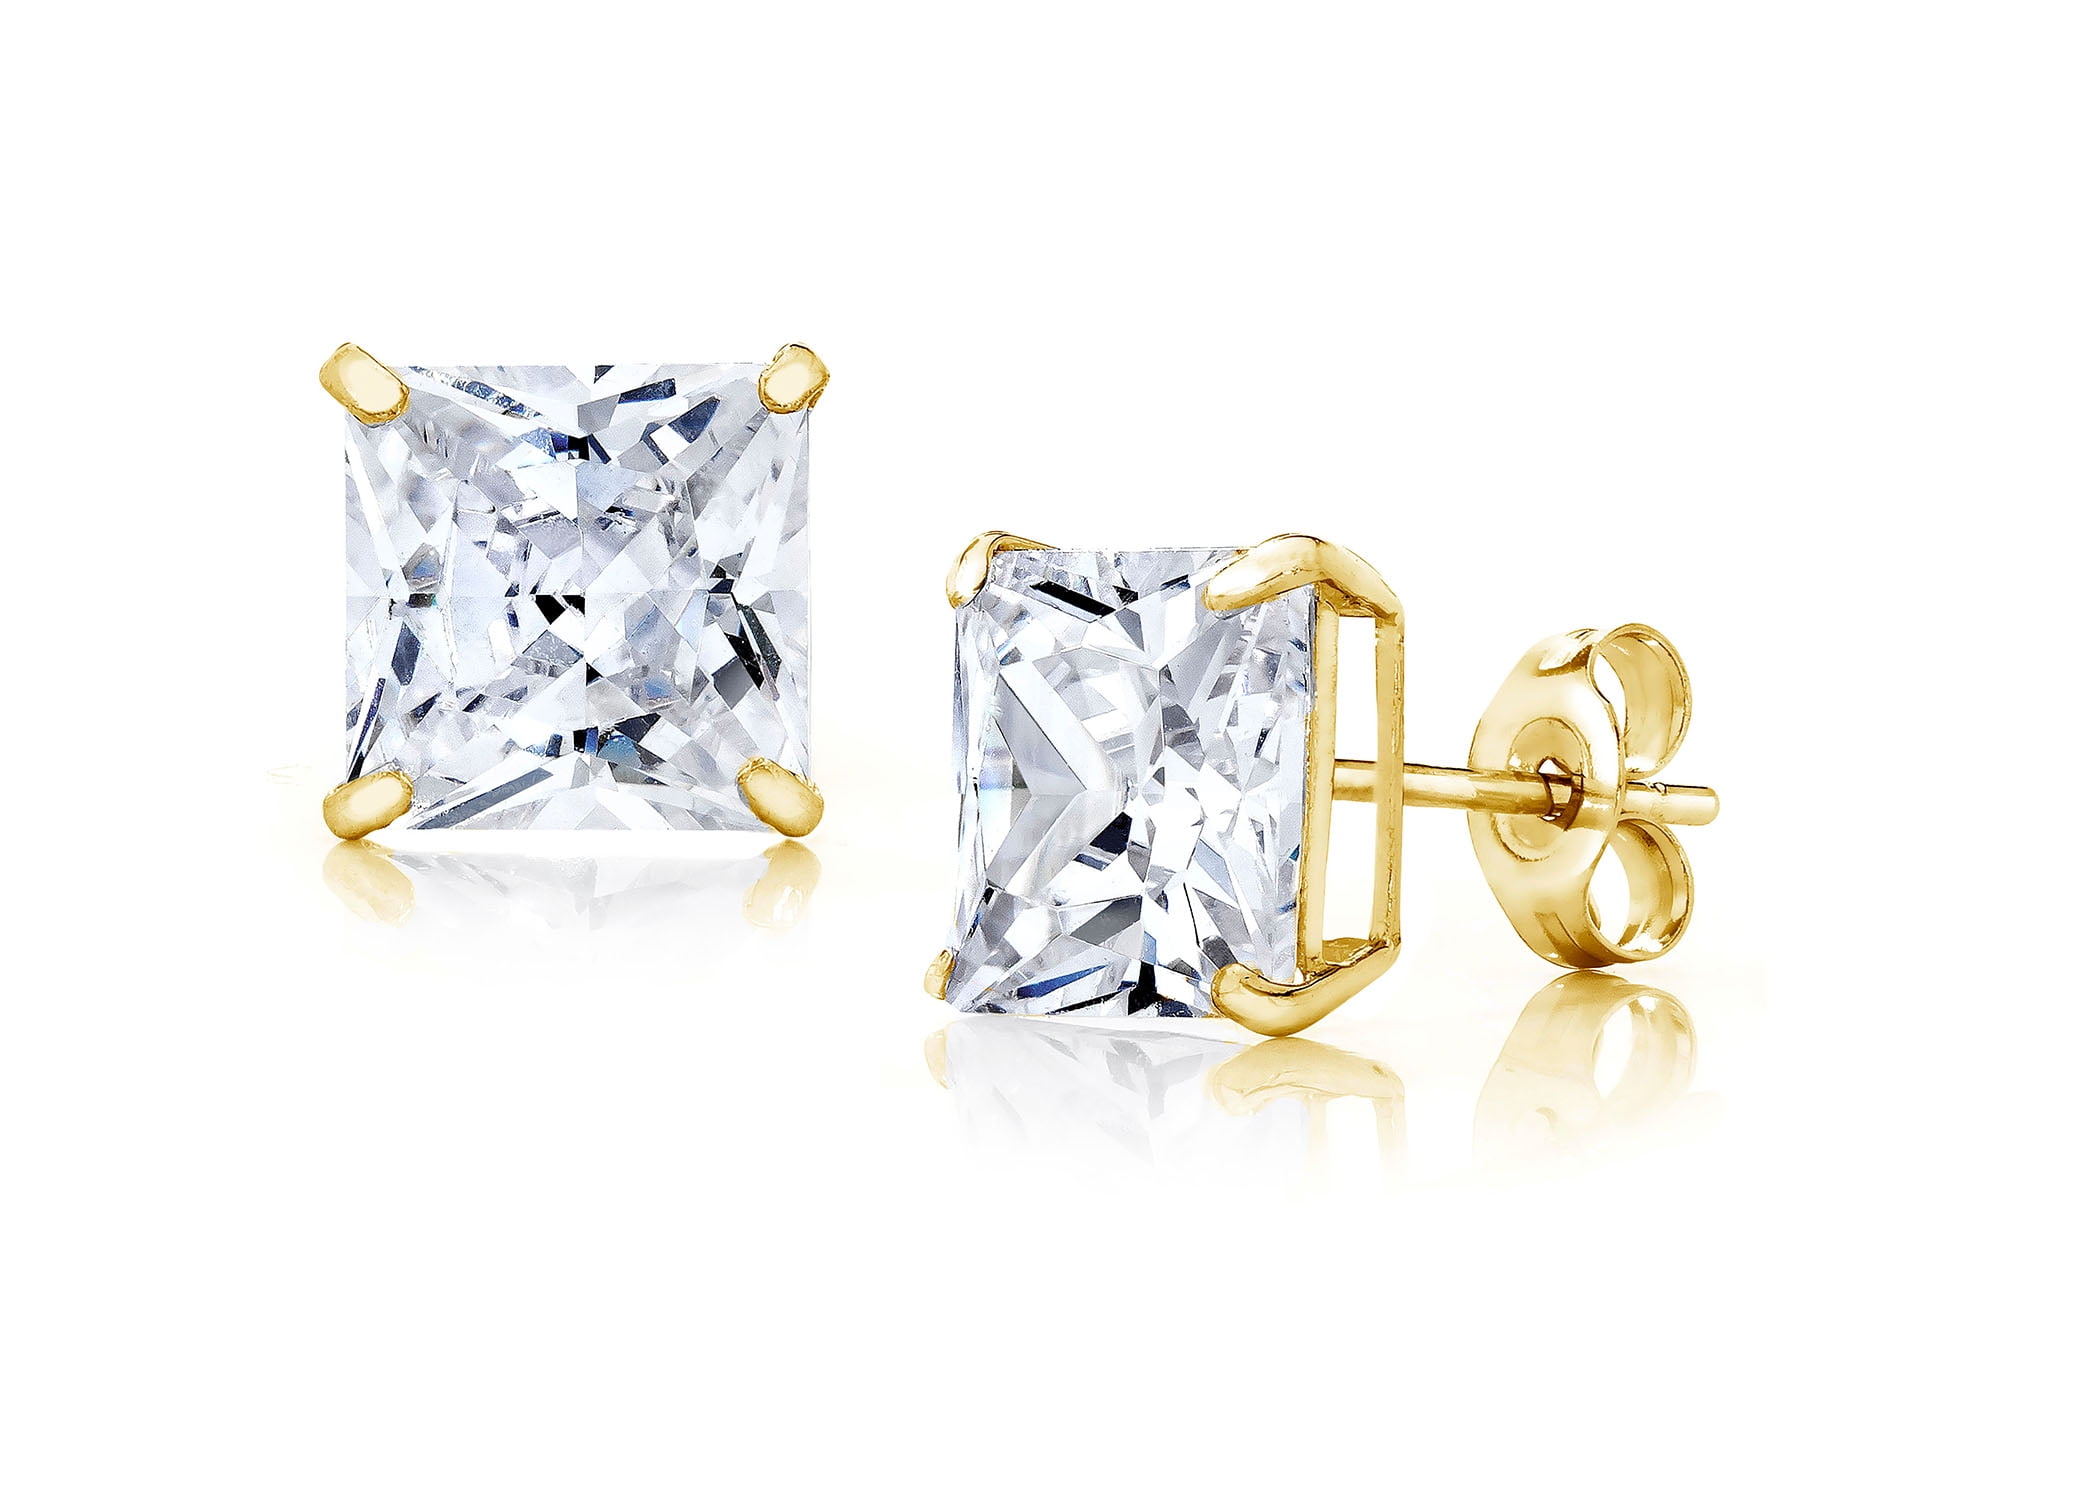 Jewelers 14K Gold 6MM Princess-Cut Stud Earrings made with Crystals ...